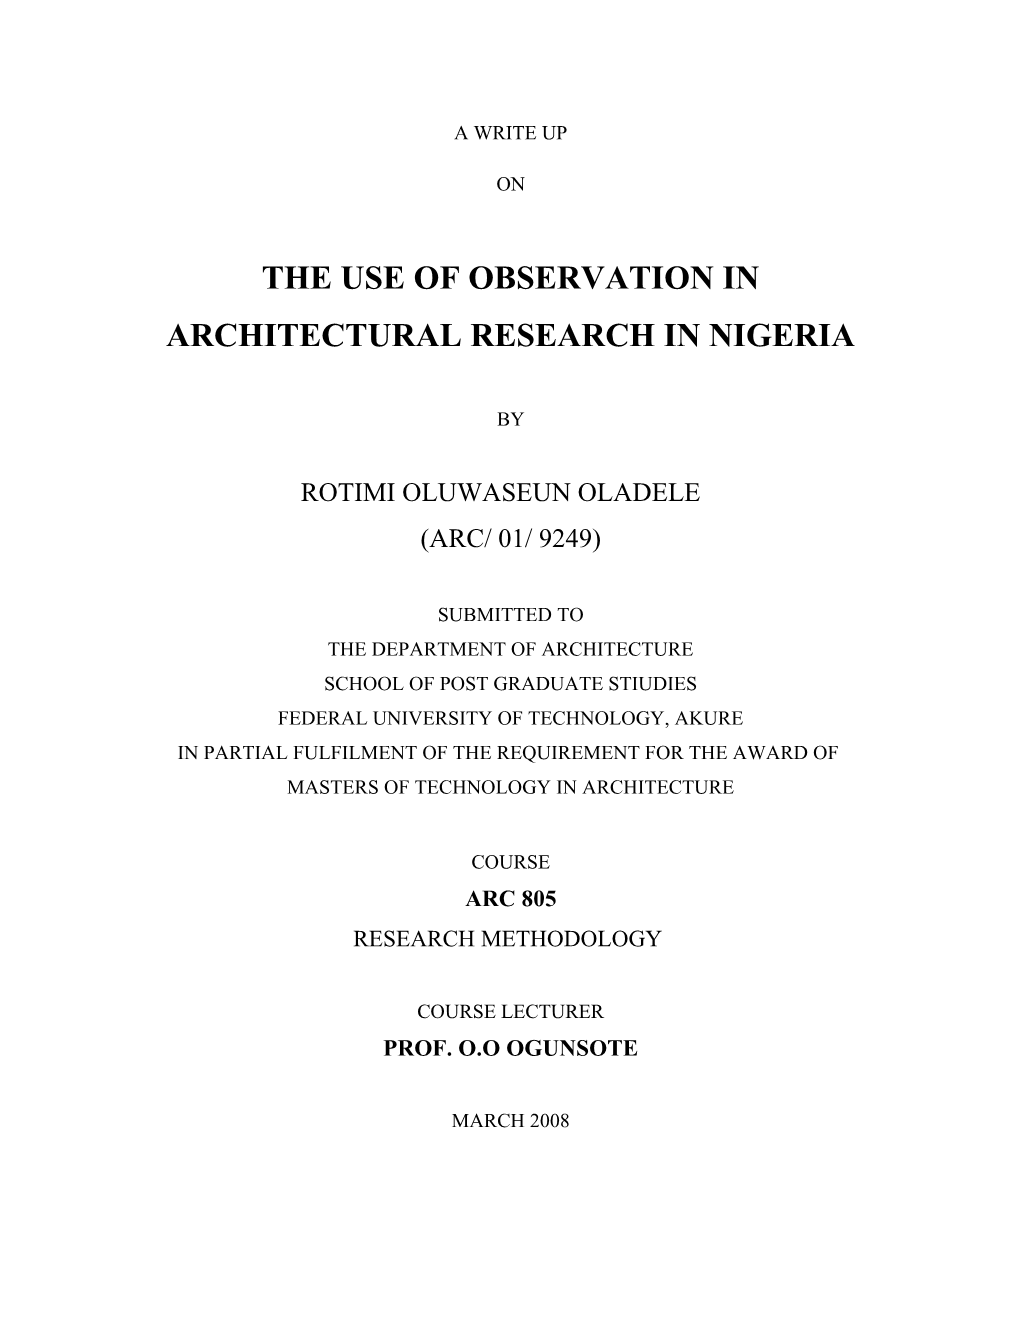 The Use of Observation in Architectural Research in Nigeria